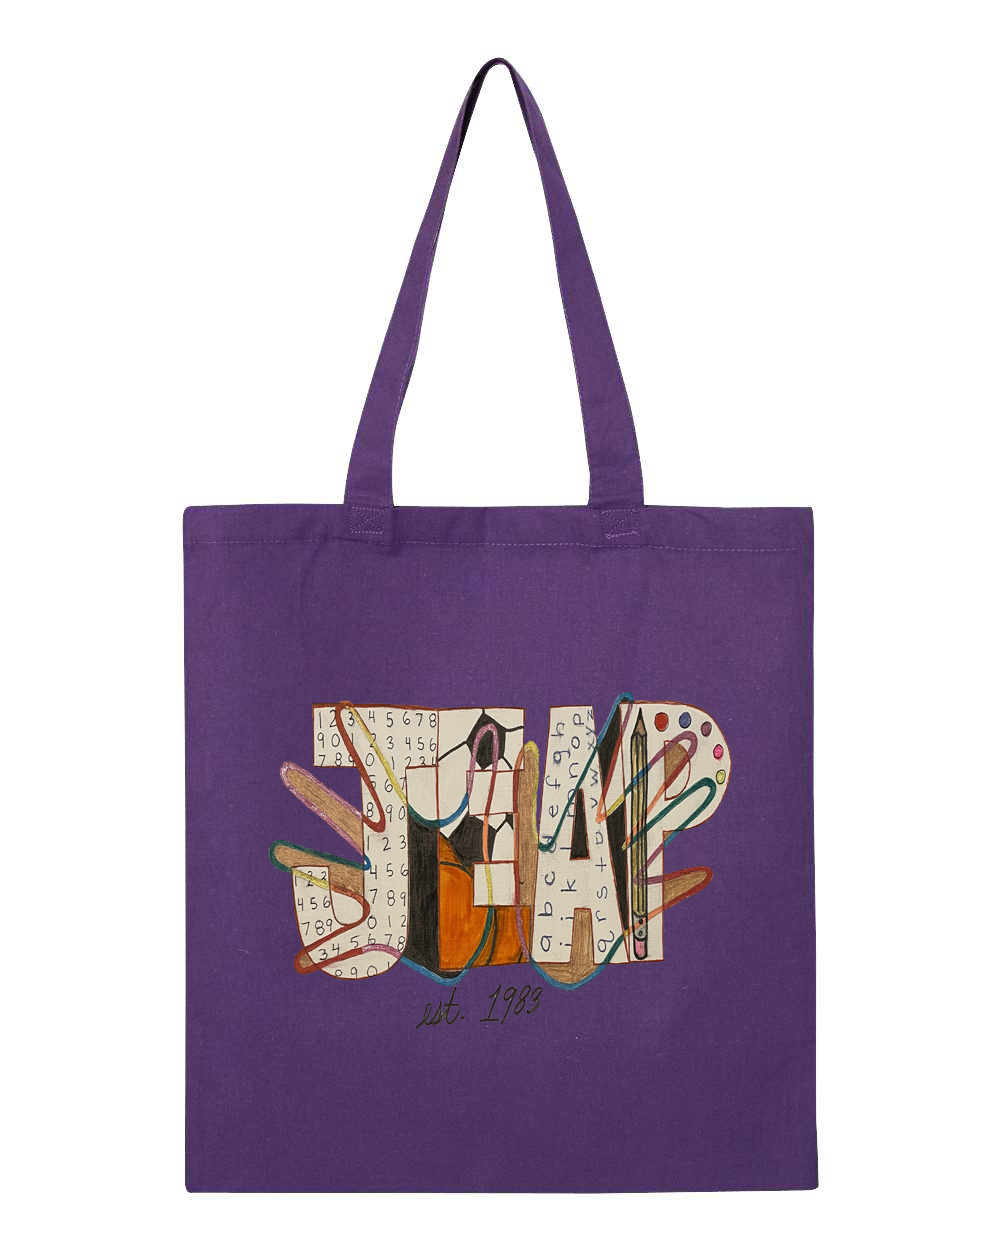 JEAP Hands Tote